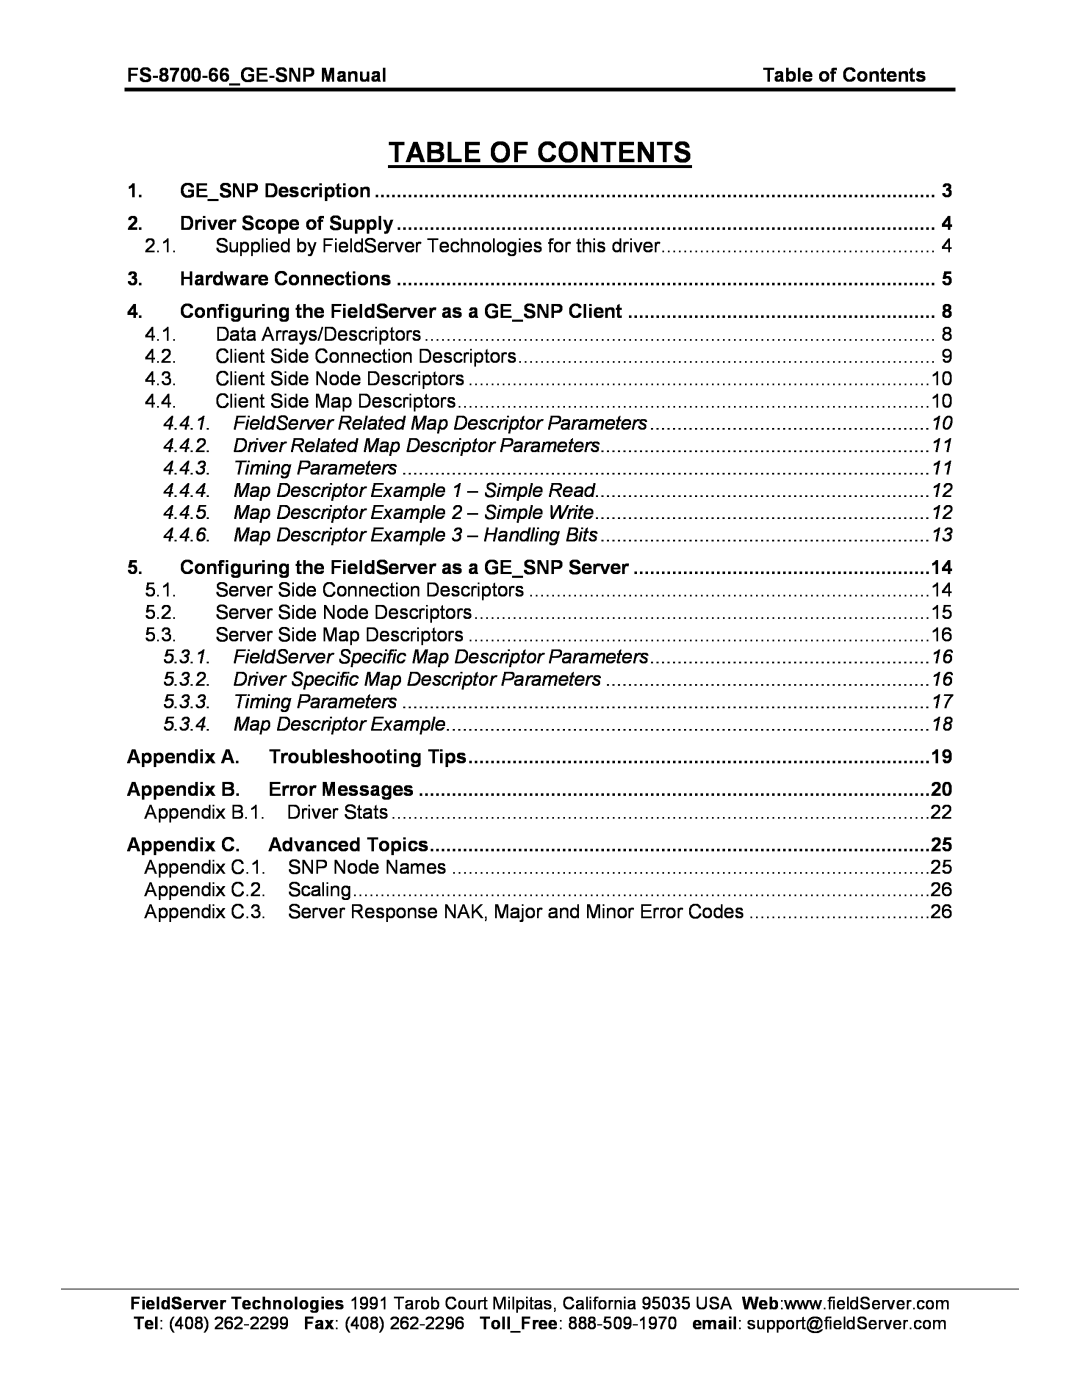 FieldServer FS-8700-66 instruction manual Table Of Contents 